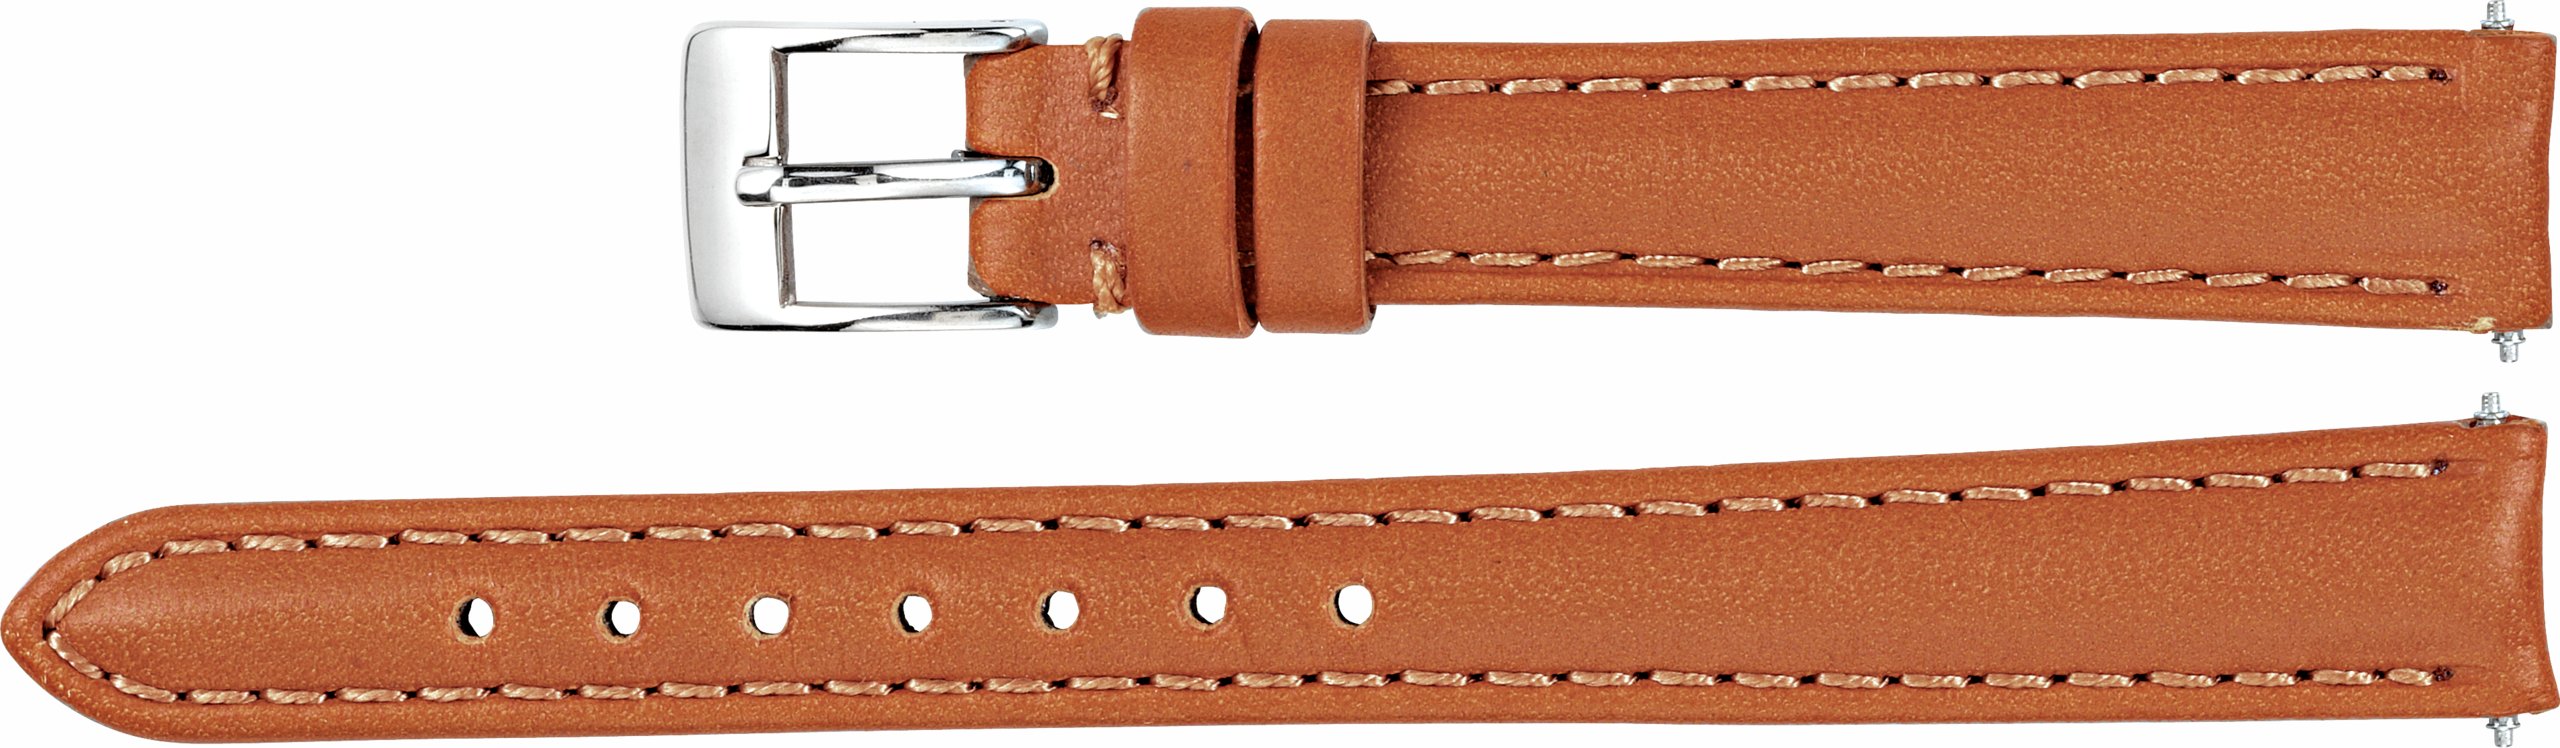 Leather Matte Bridle Padded Watch Band